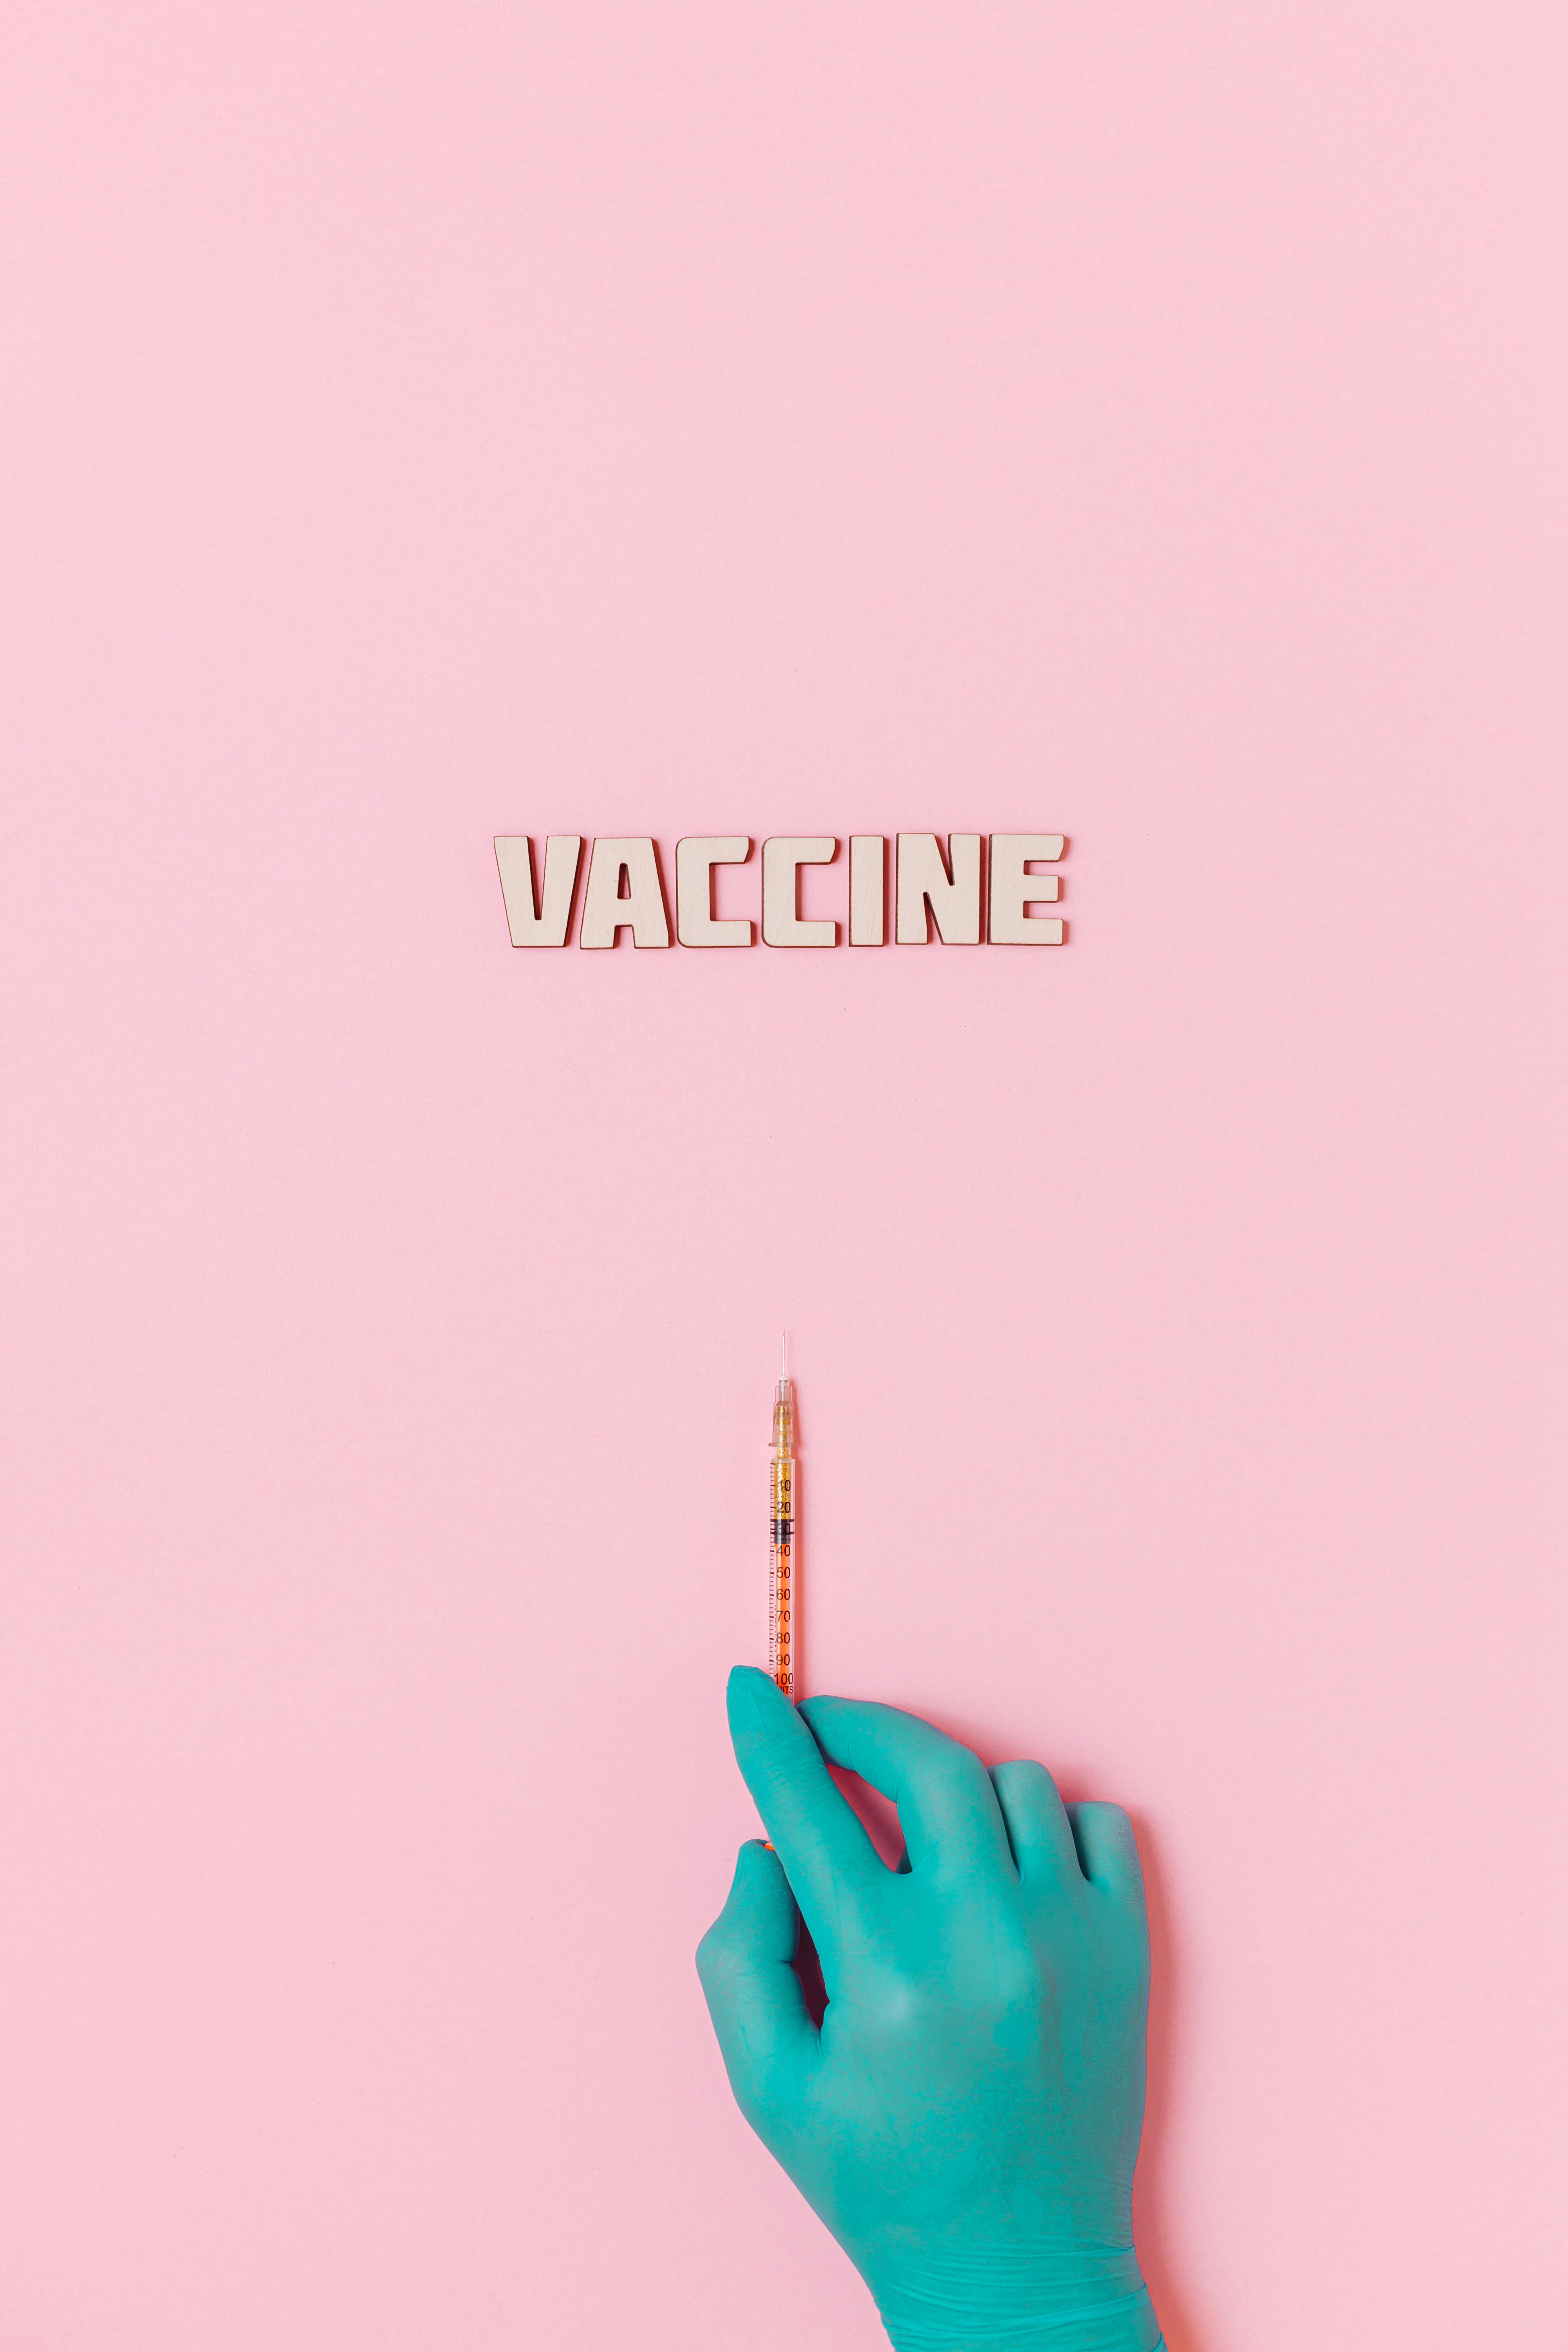 vaccine text and a person wearing latex glove while holding a syringe on pink background